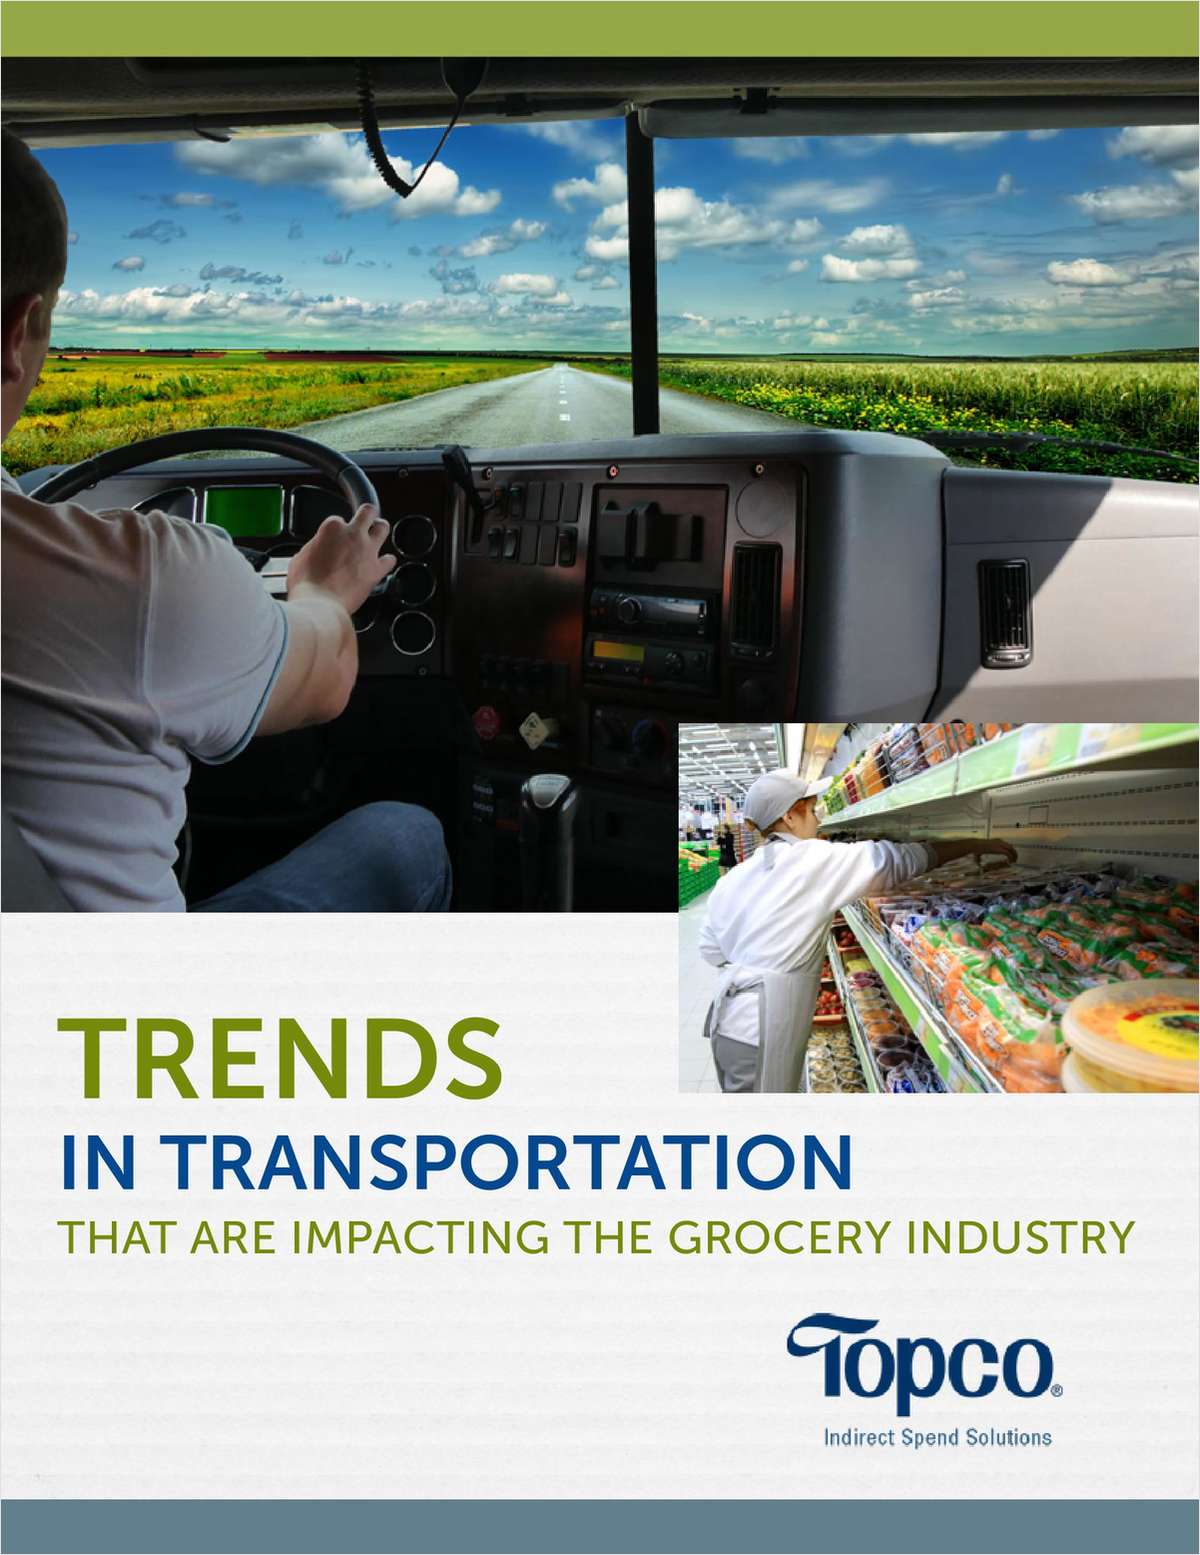 Trends in Transportation That Are Impacting the Grocery Industry